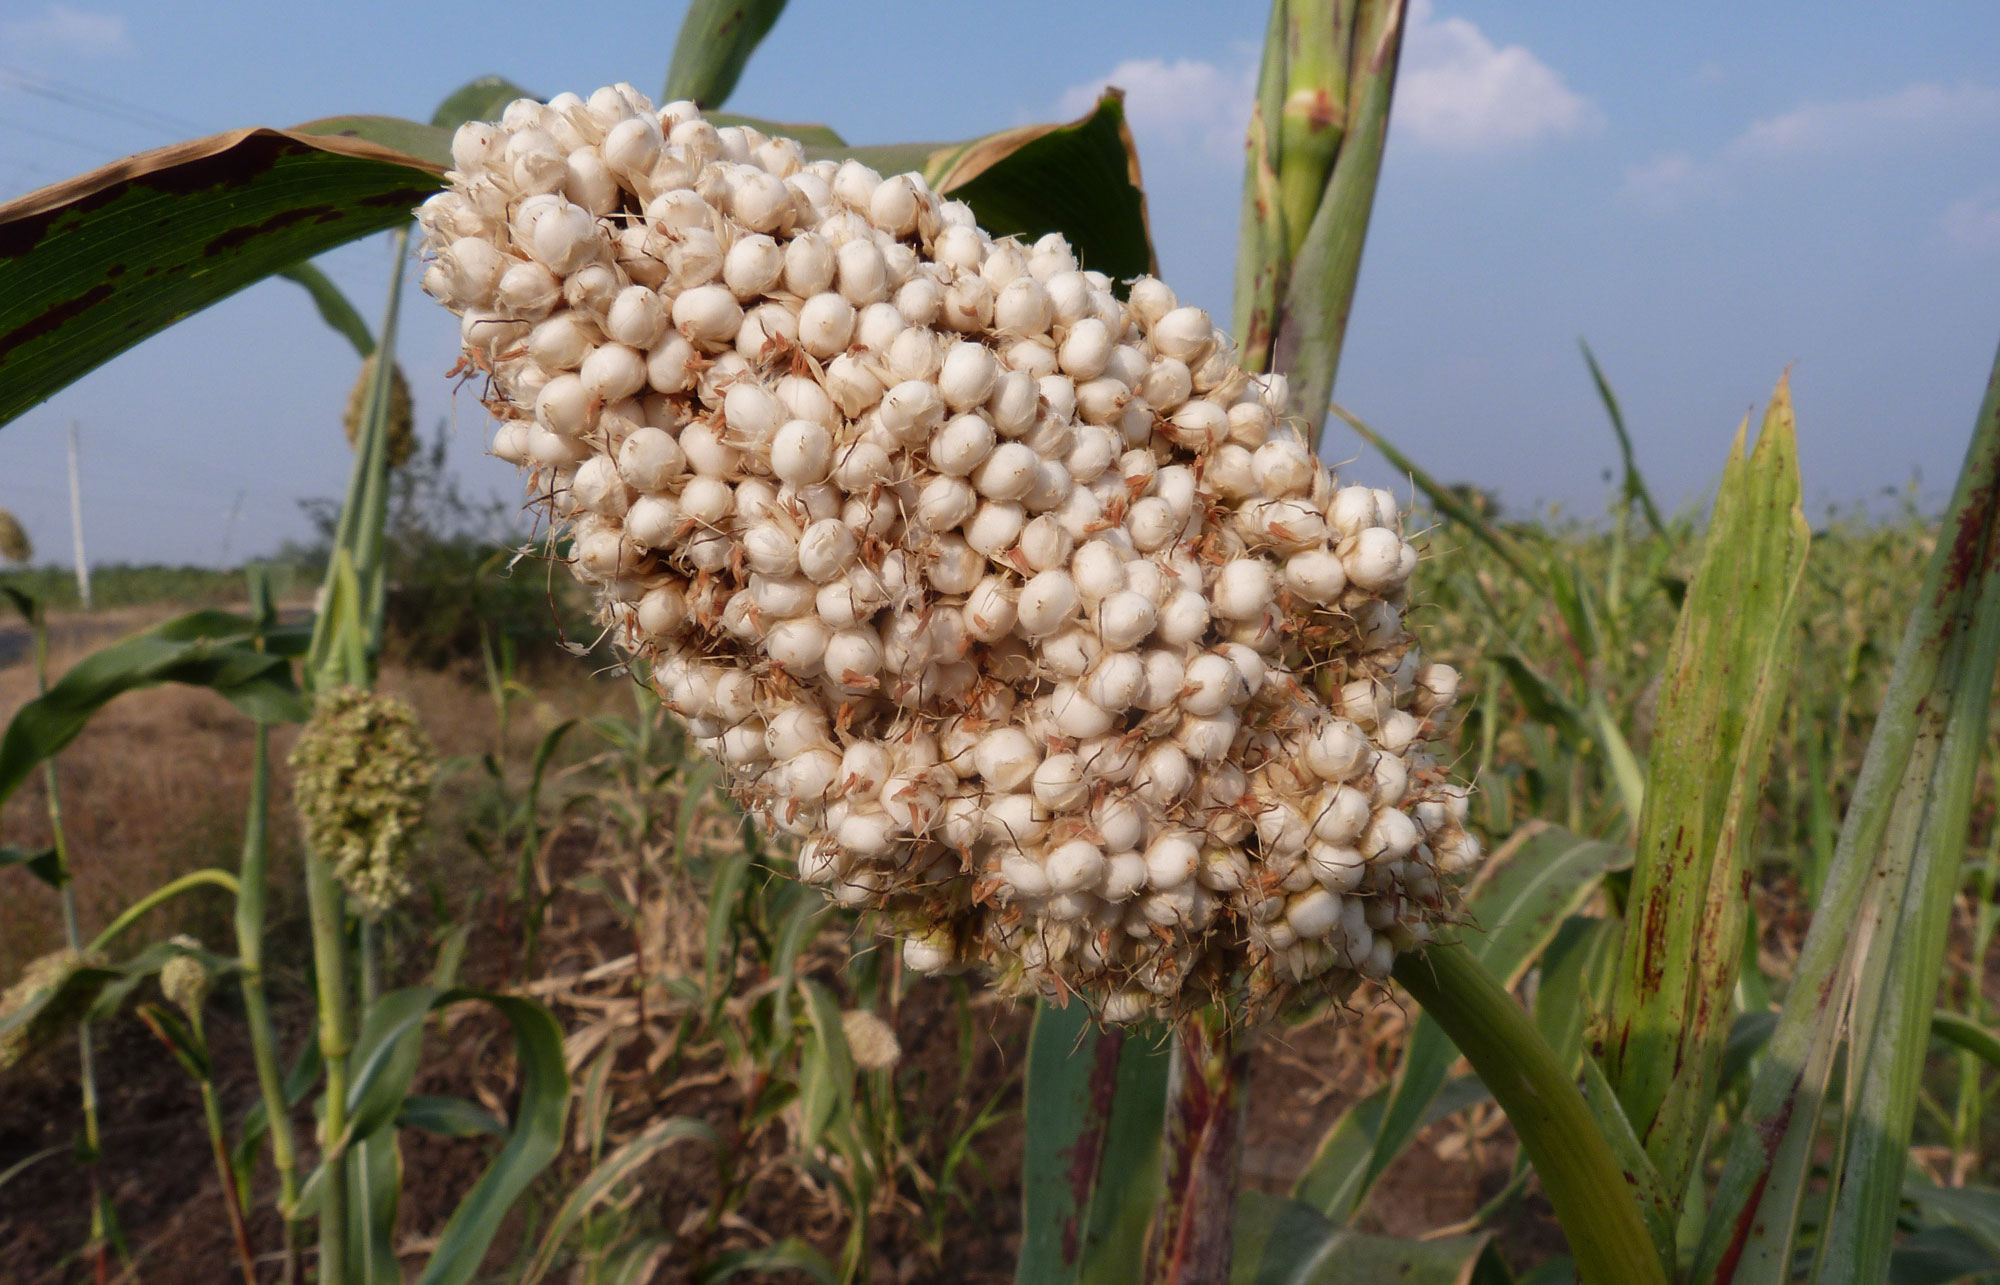 Photograph of a ear or head of sorghum, India. The photo shows a conical ear of sorghum with off-white grains.